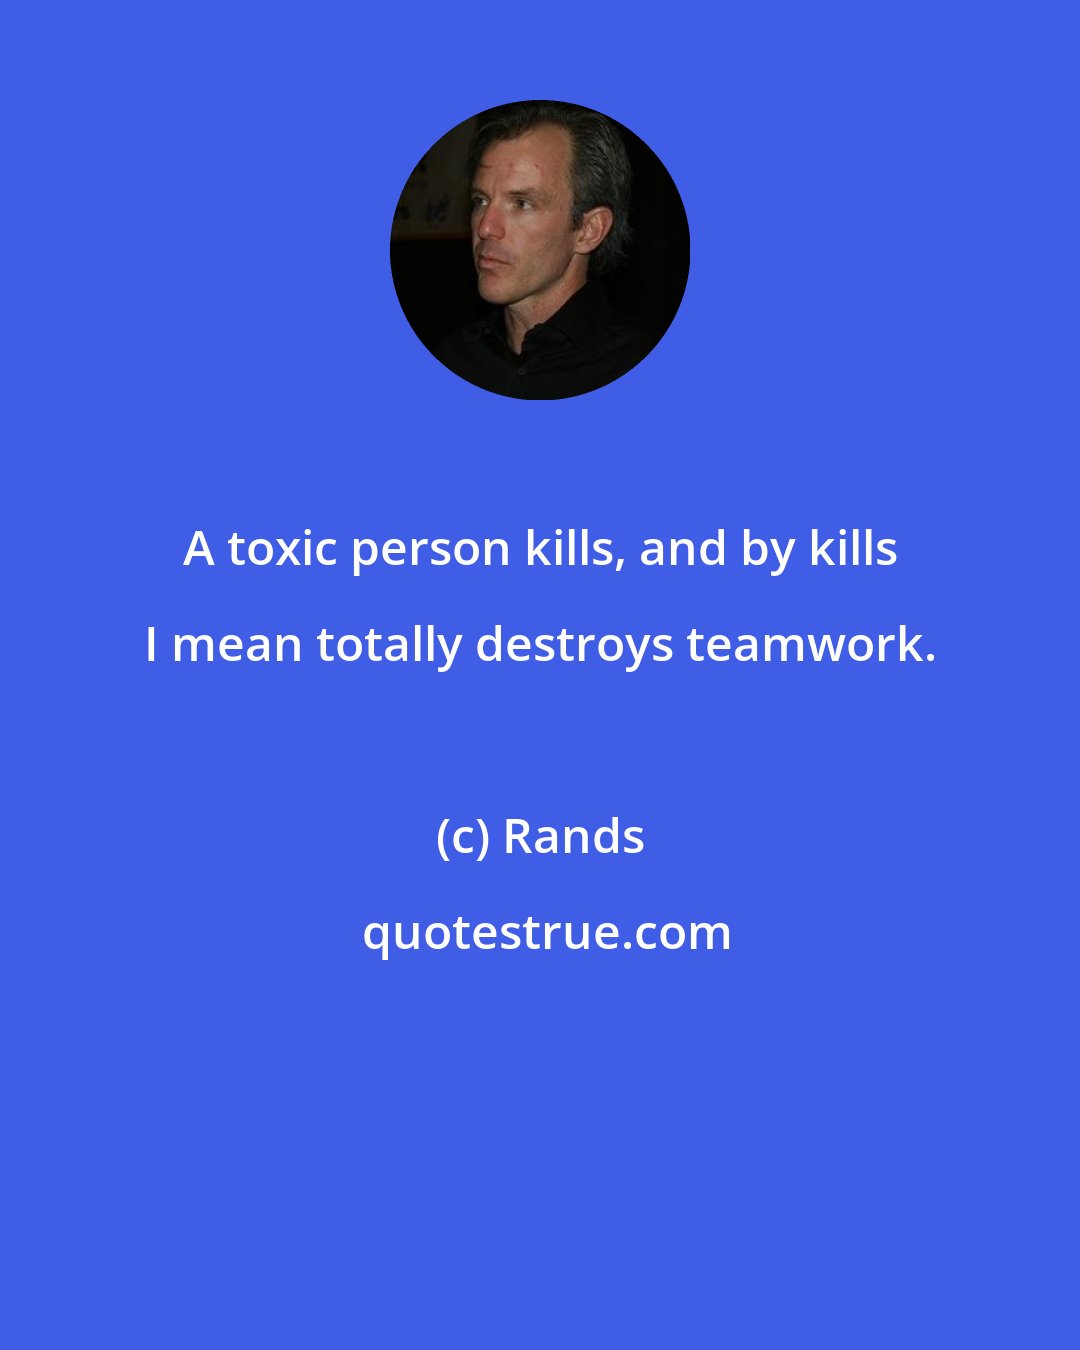 Rands: A toxic person kills, and by kills I mean totally destroys teamwork.